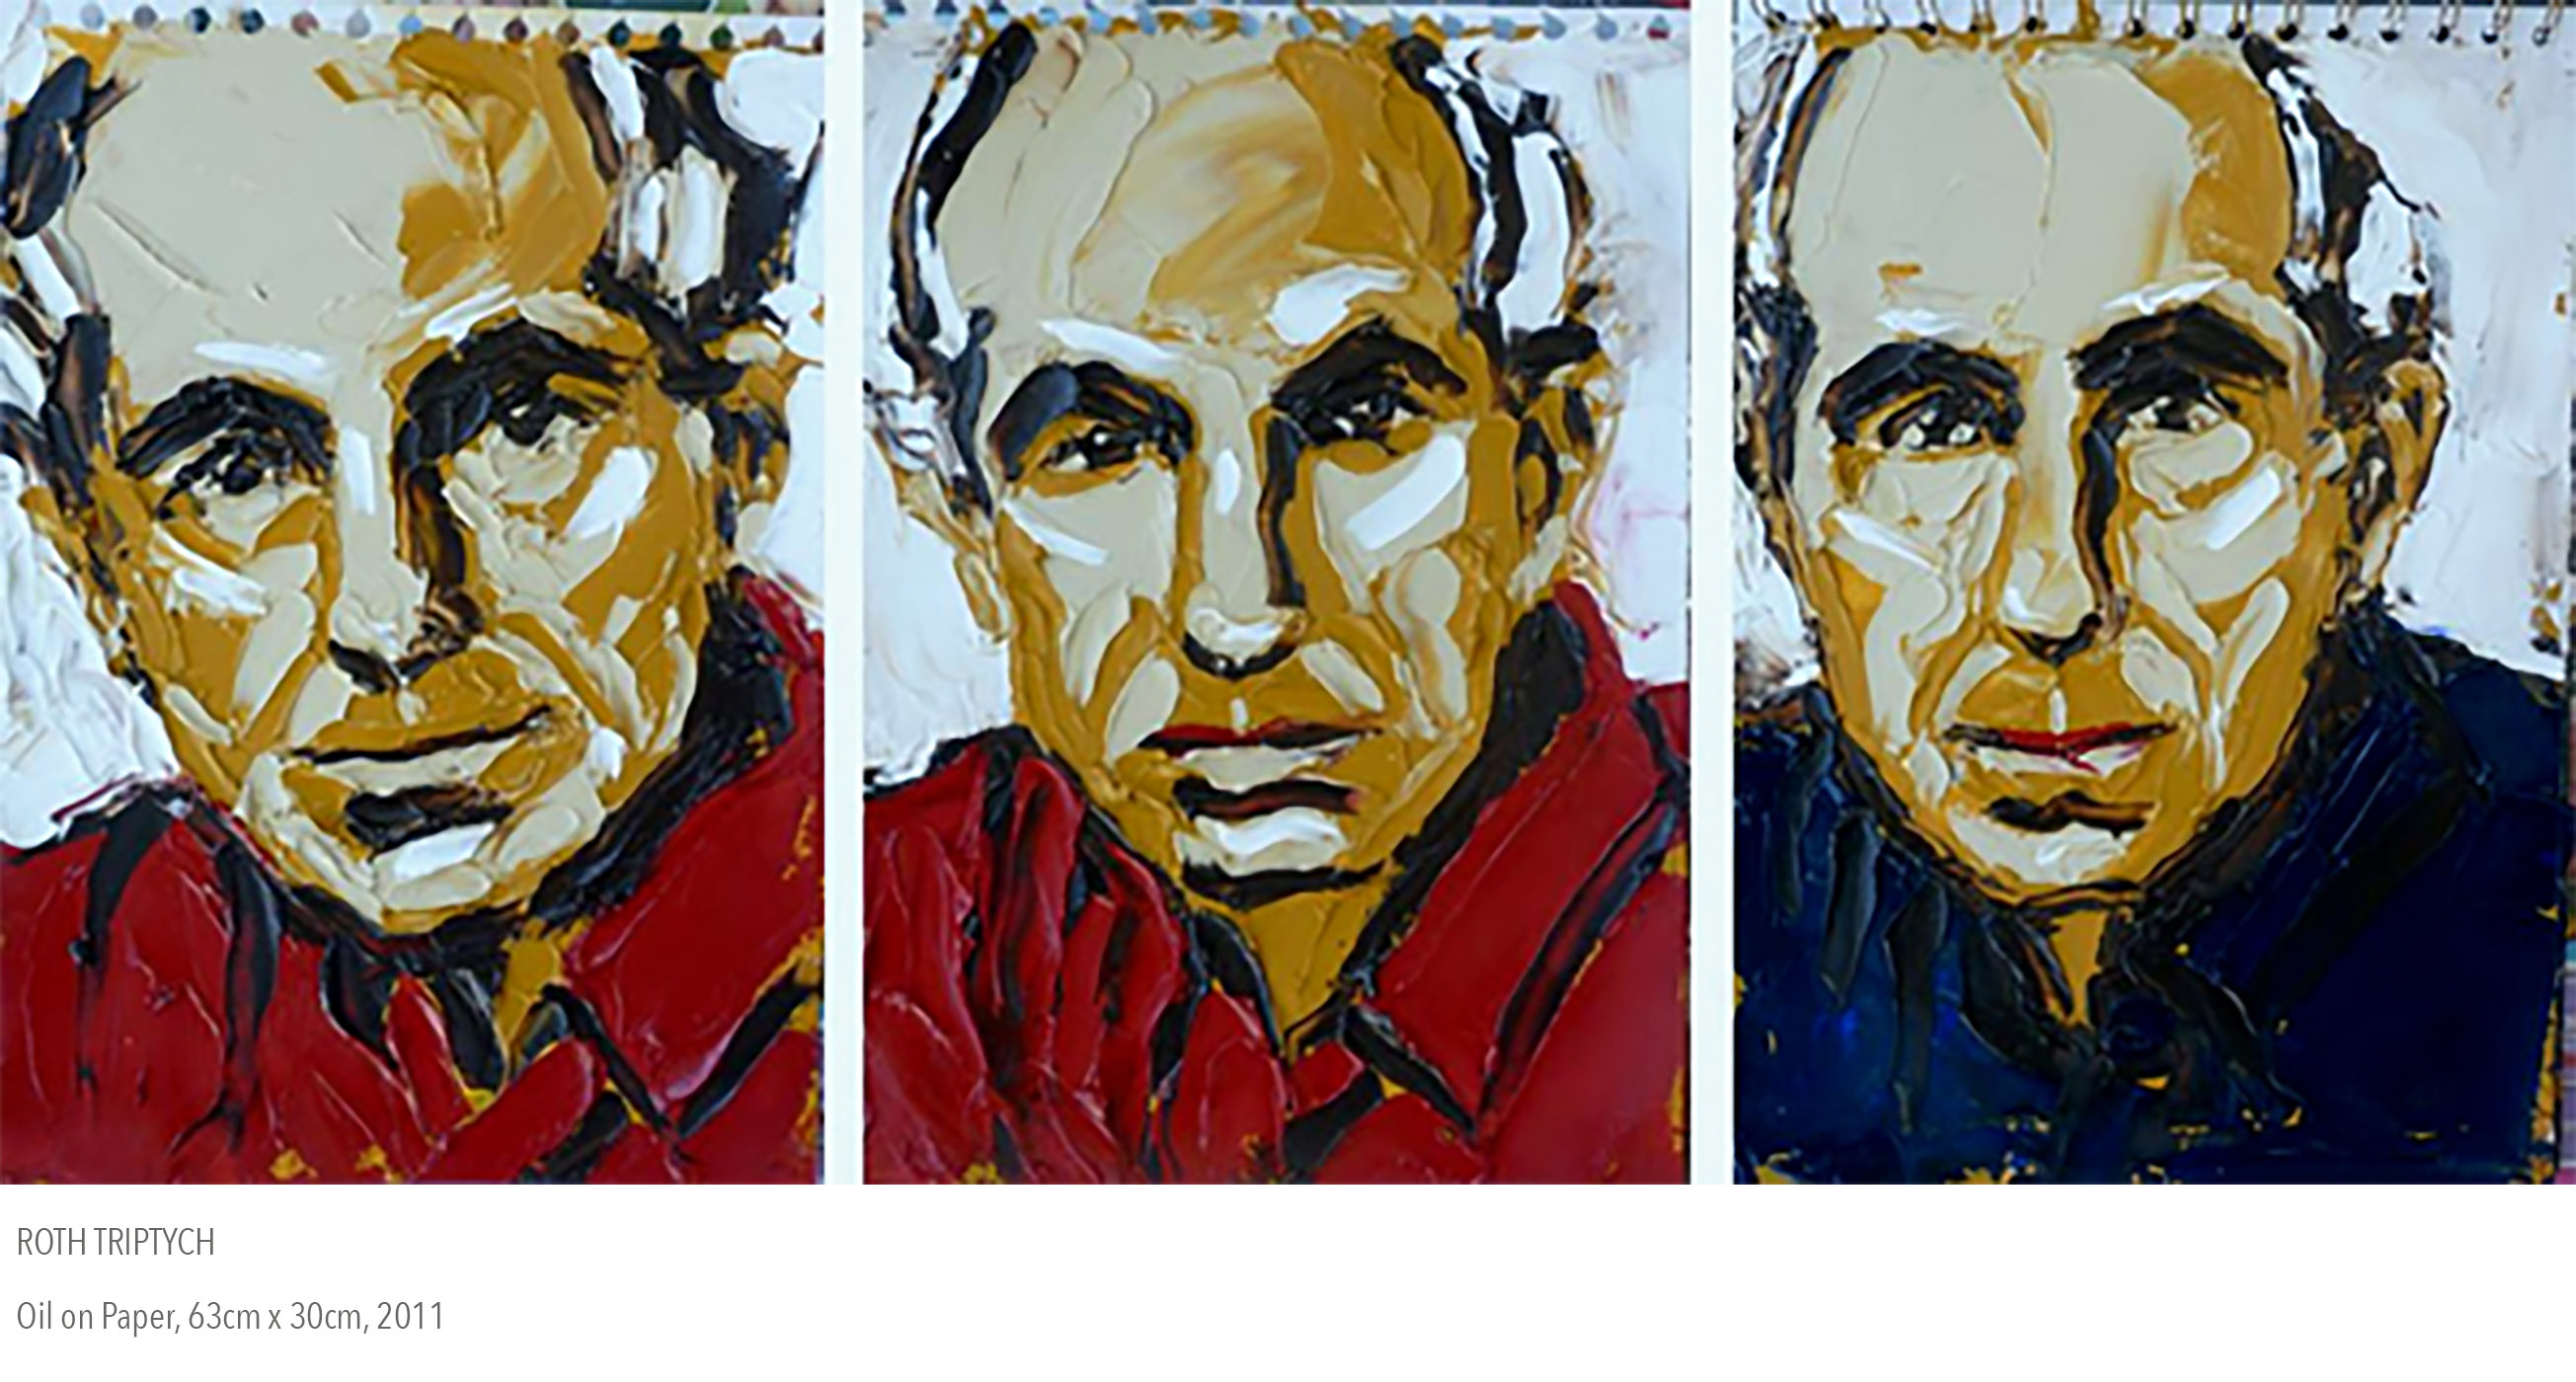 2011 oil painting called Roth Tryptych